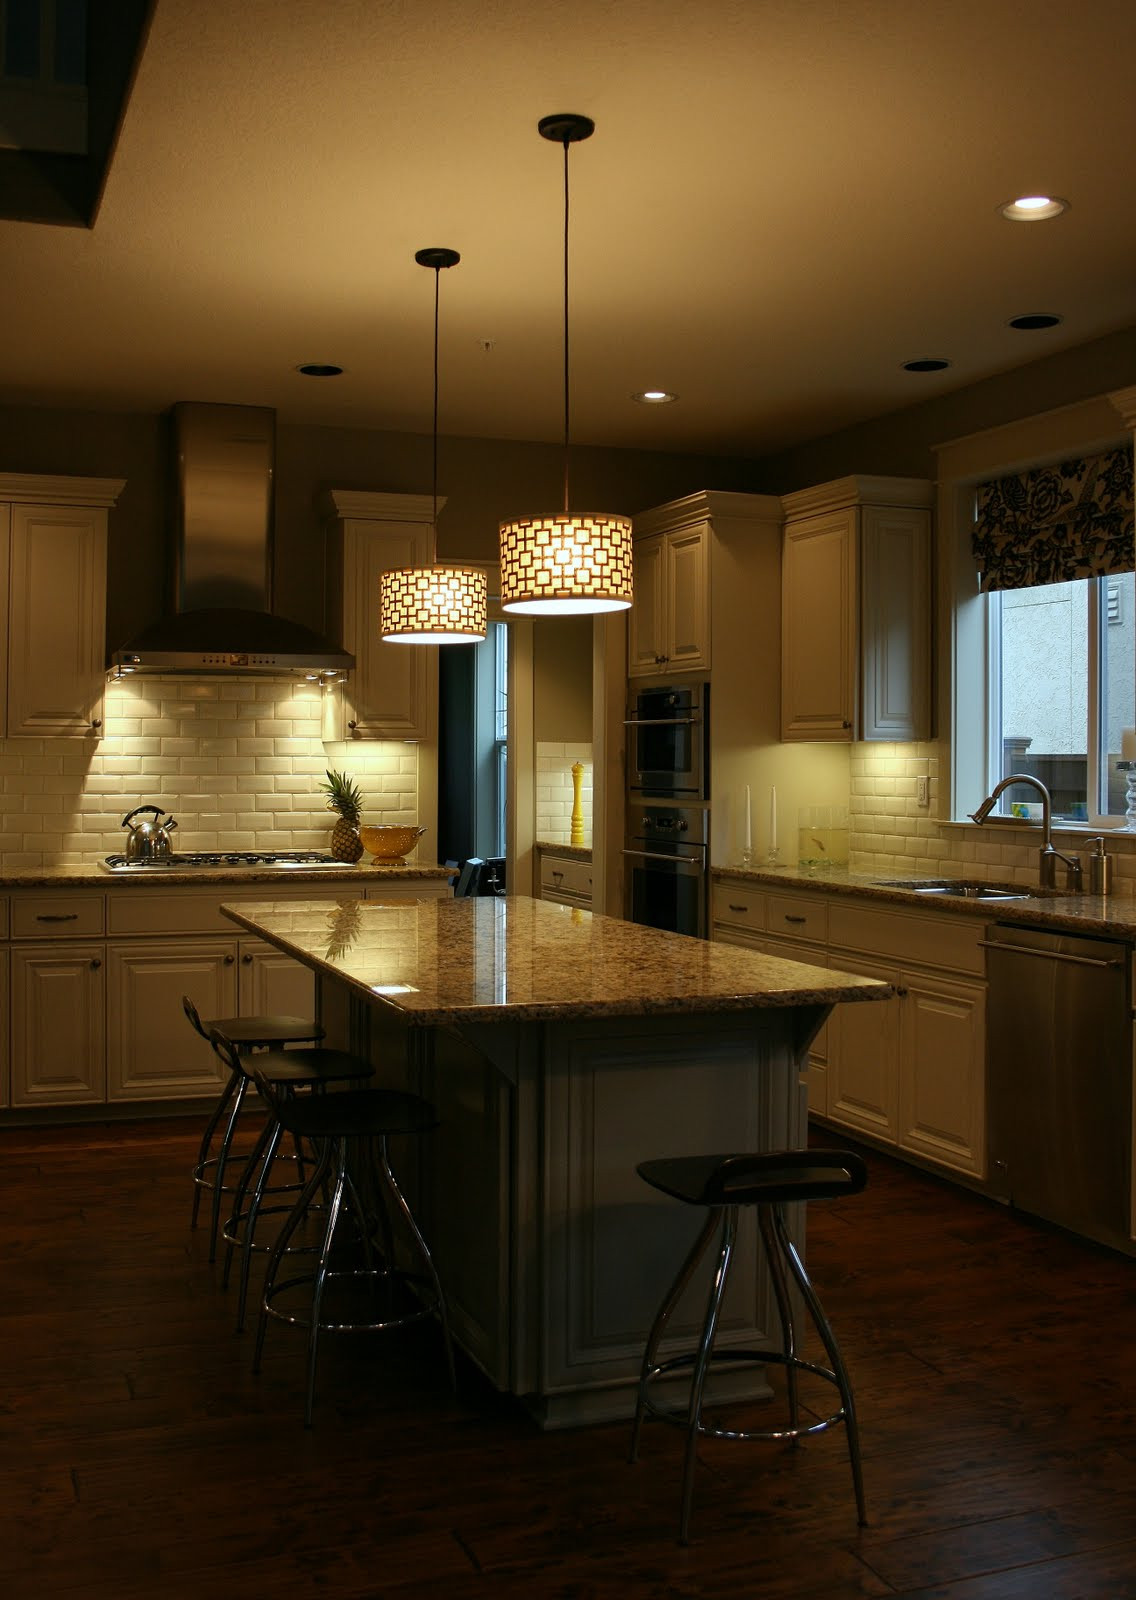 Light Fixture For Kitchen Island
 Kitchen Island Lighting System with Pendant and Chandelier